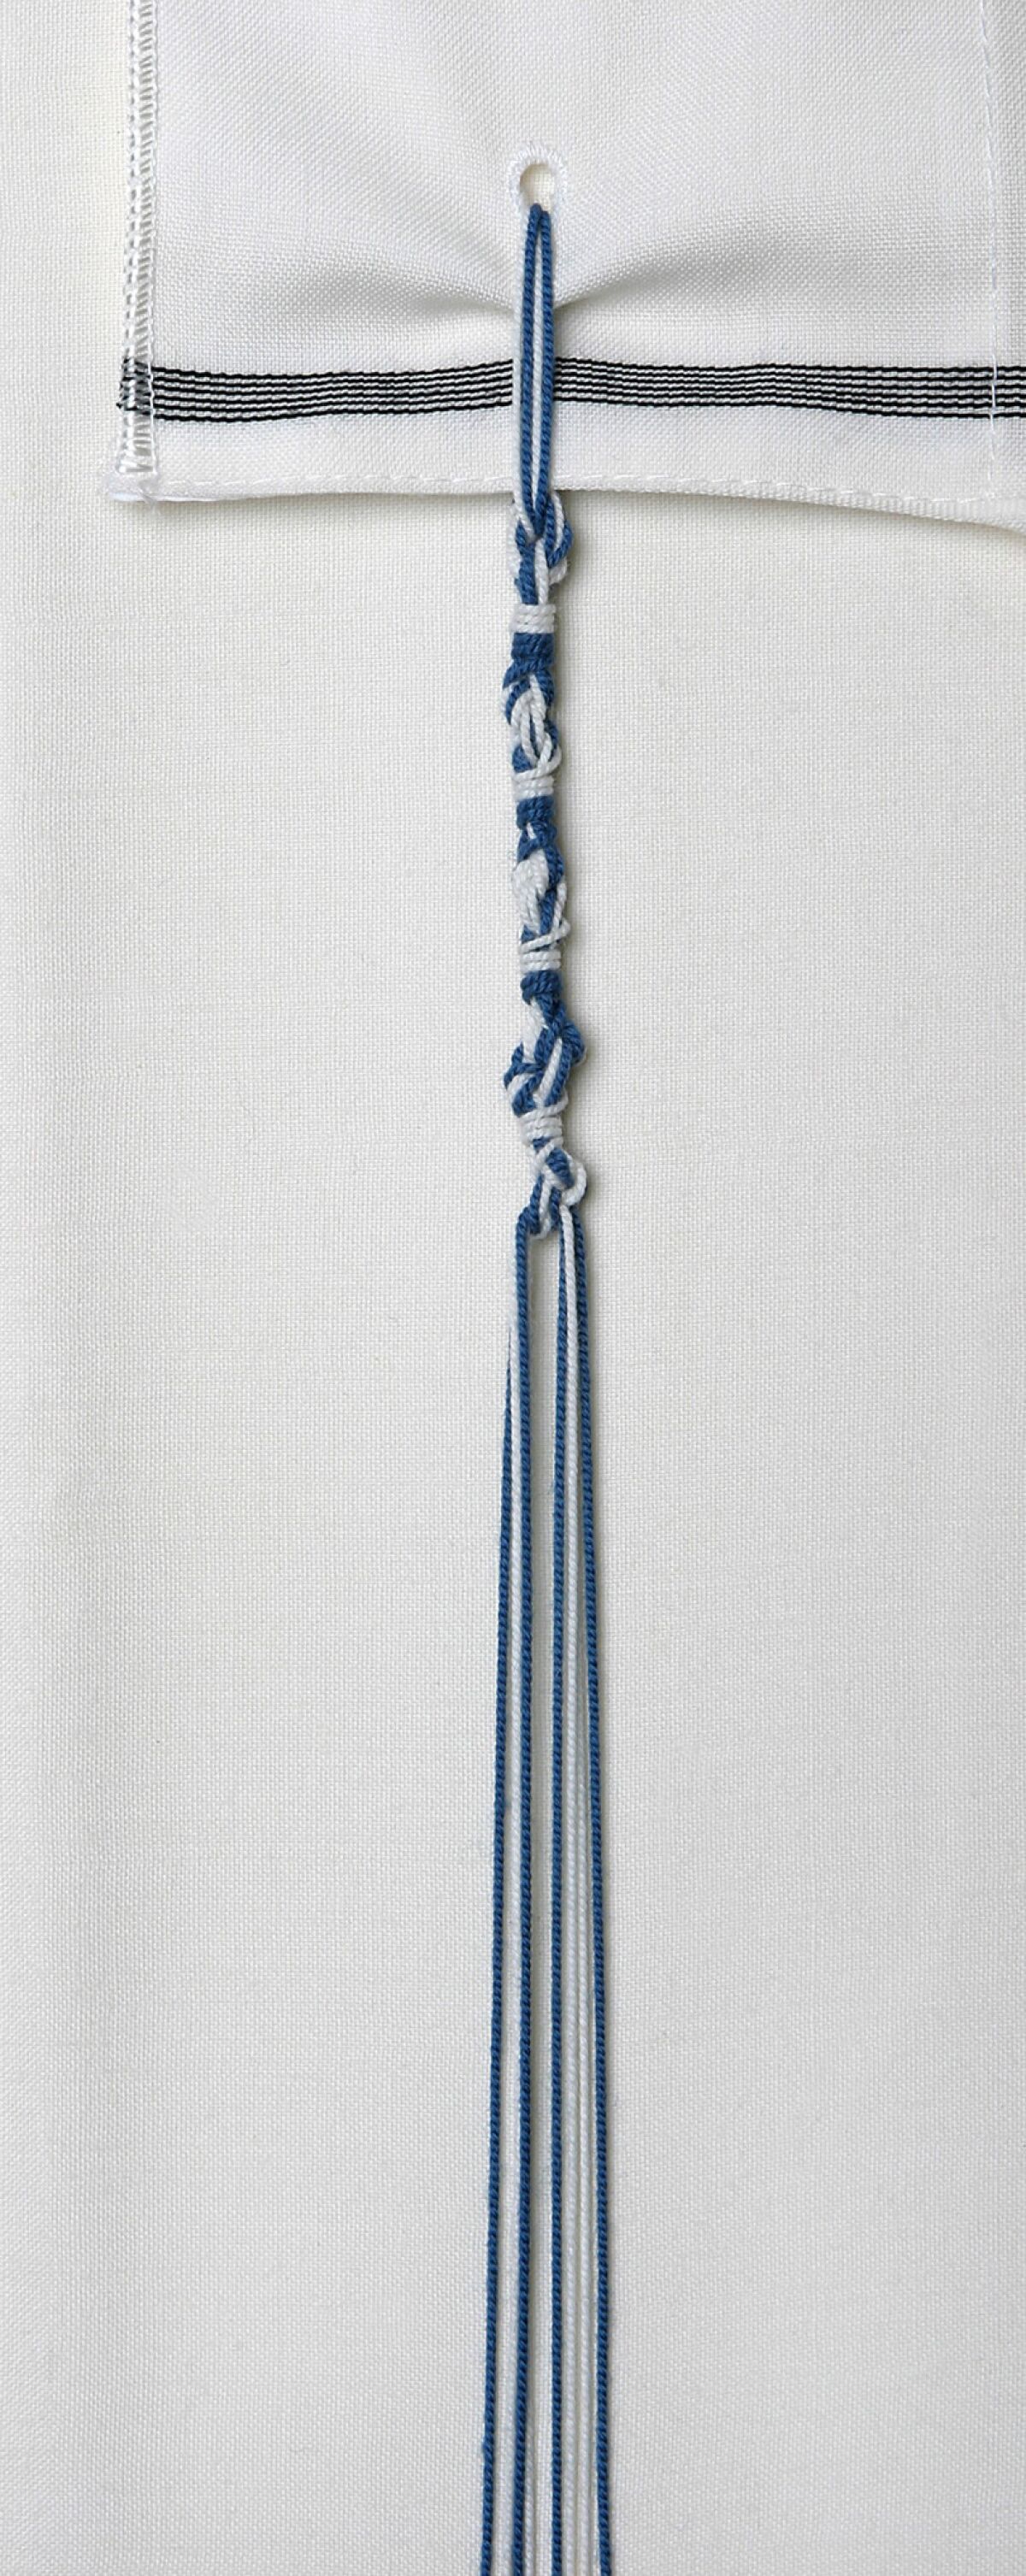 Tzitzit tassels with threads dyed in tekhelet ("biblical blue") produced by Murex trunculus snails.